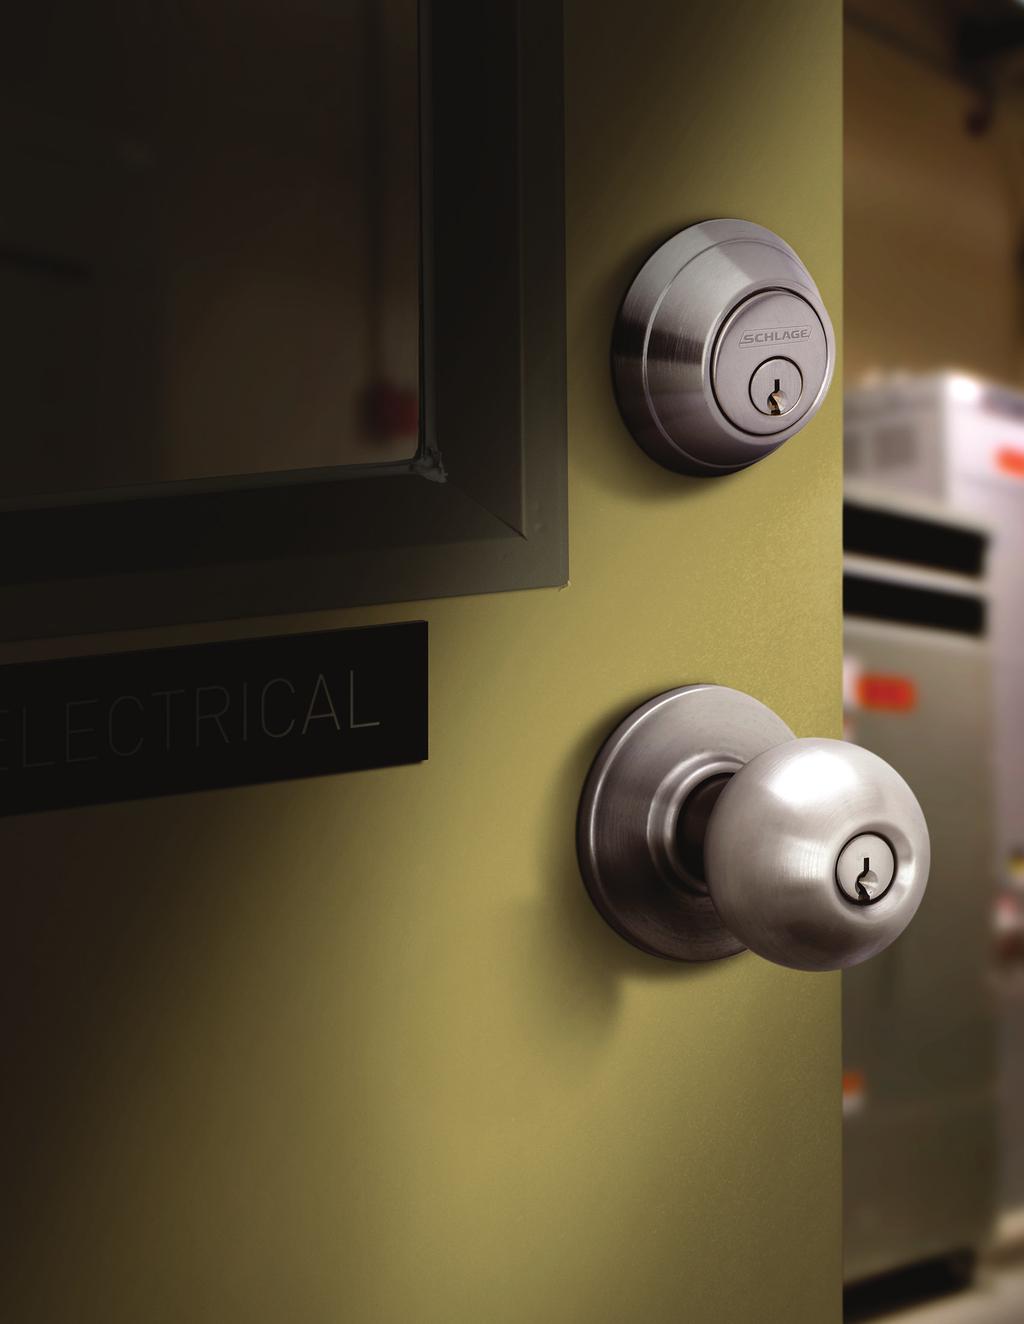 B600/700/800 Series The B600/700/800 Series are s highest grade deadbolt locks. Choose the 600 for Grade 1 security in high-traffic commercial applications.